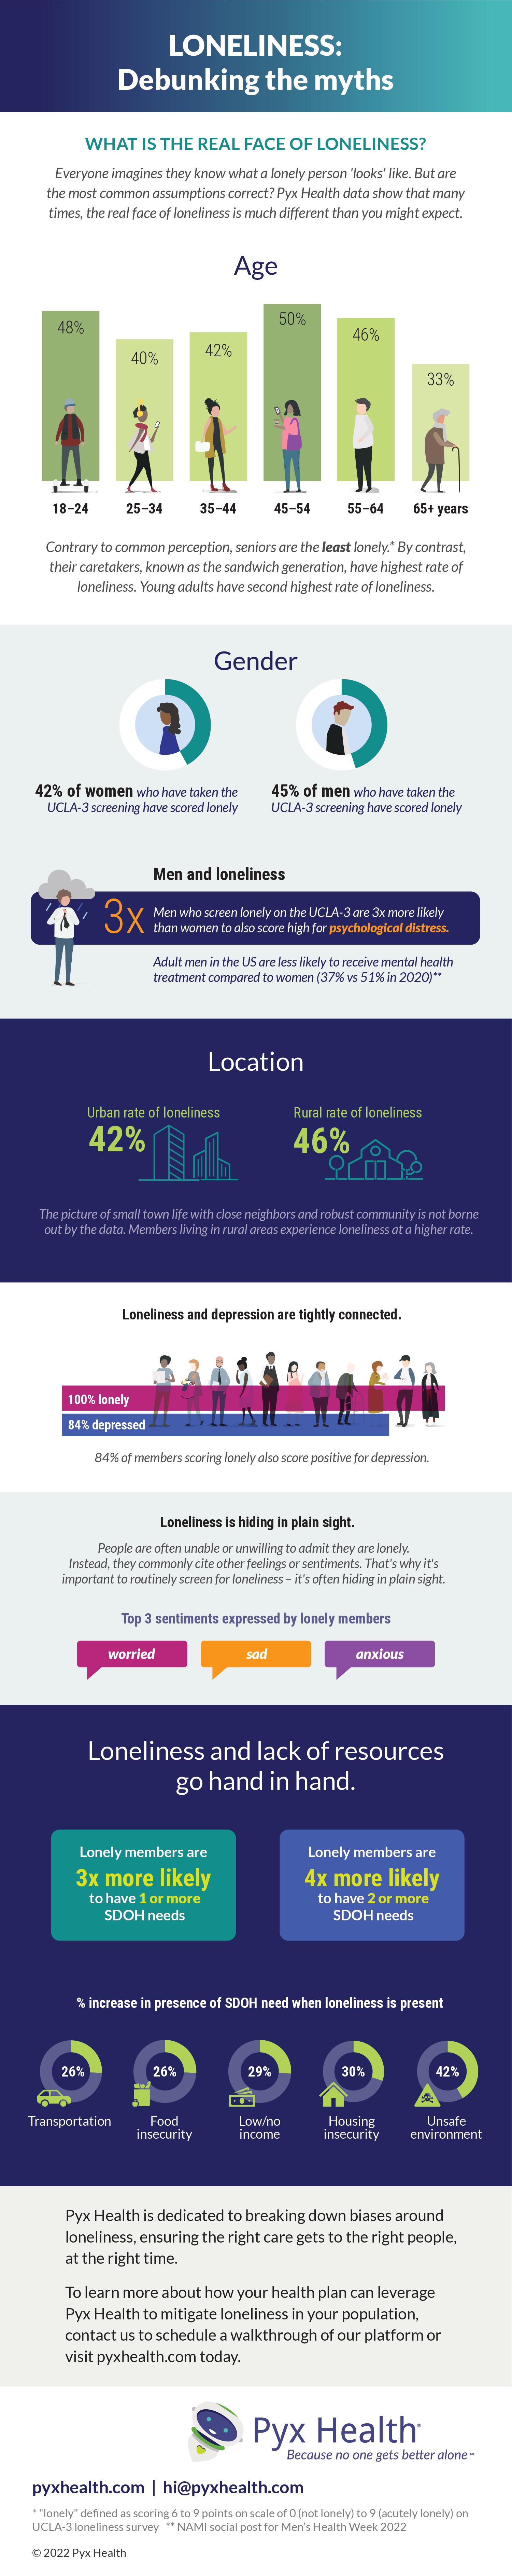 Pyx Health-infographic-loneliness myths-07-19-22